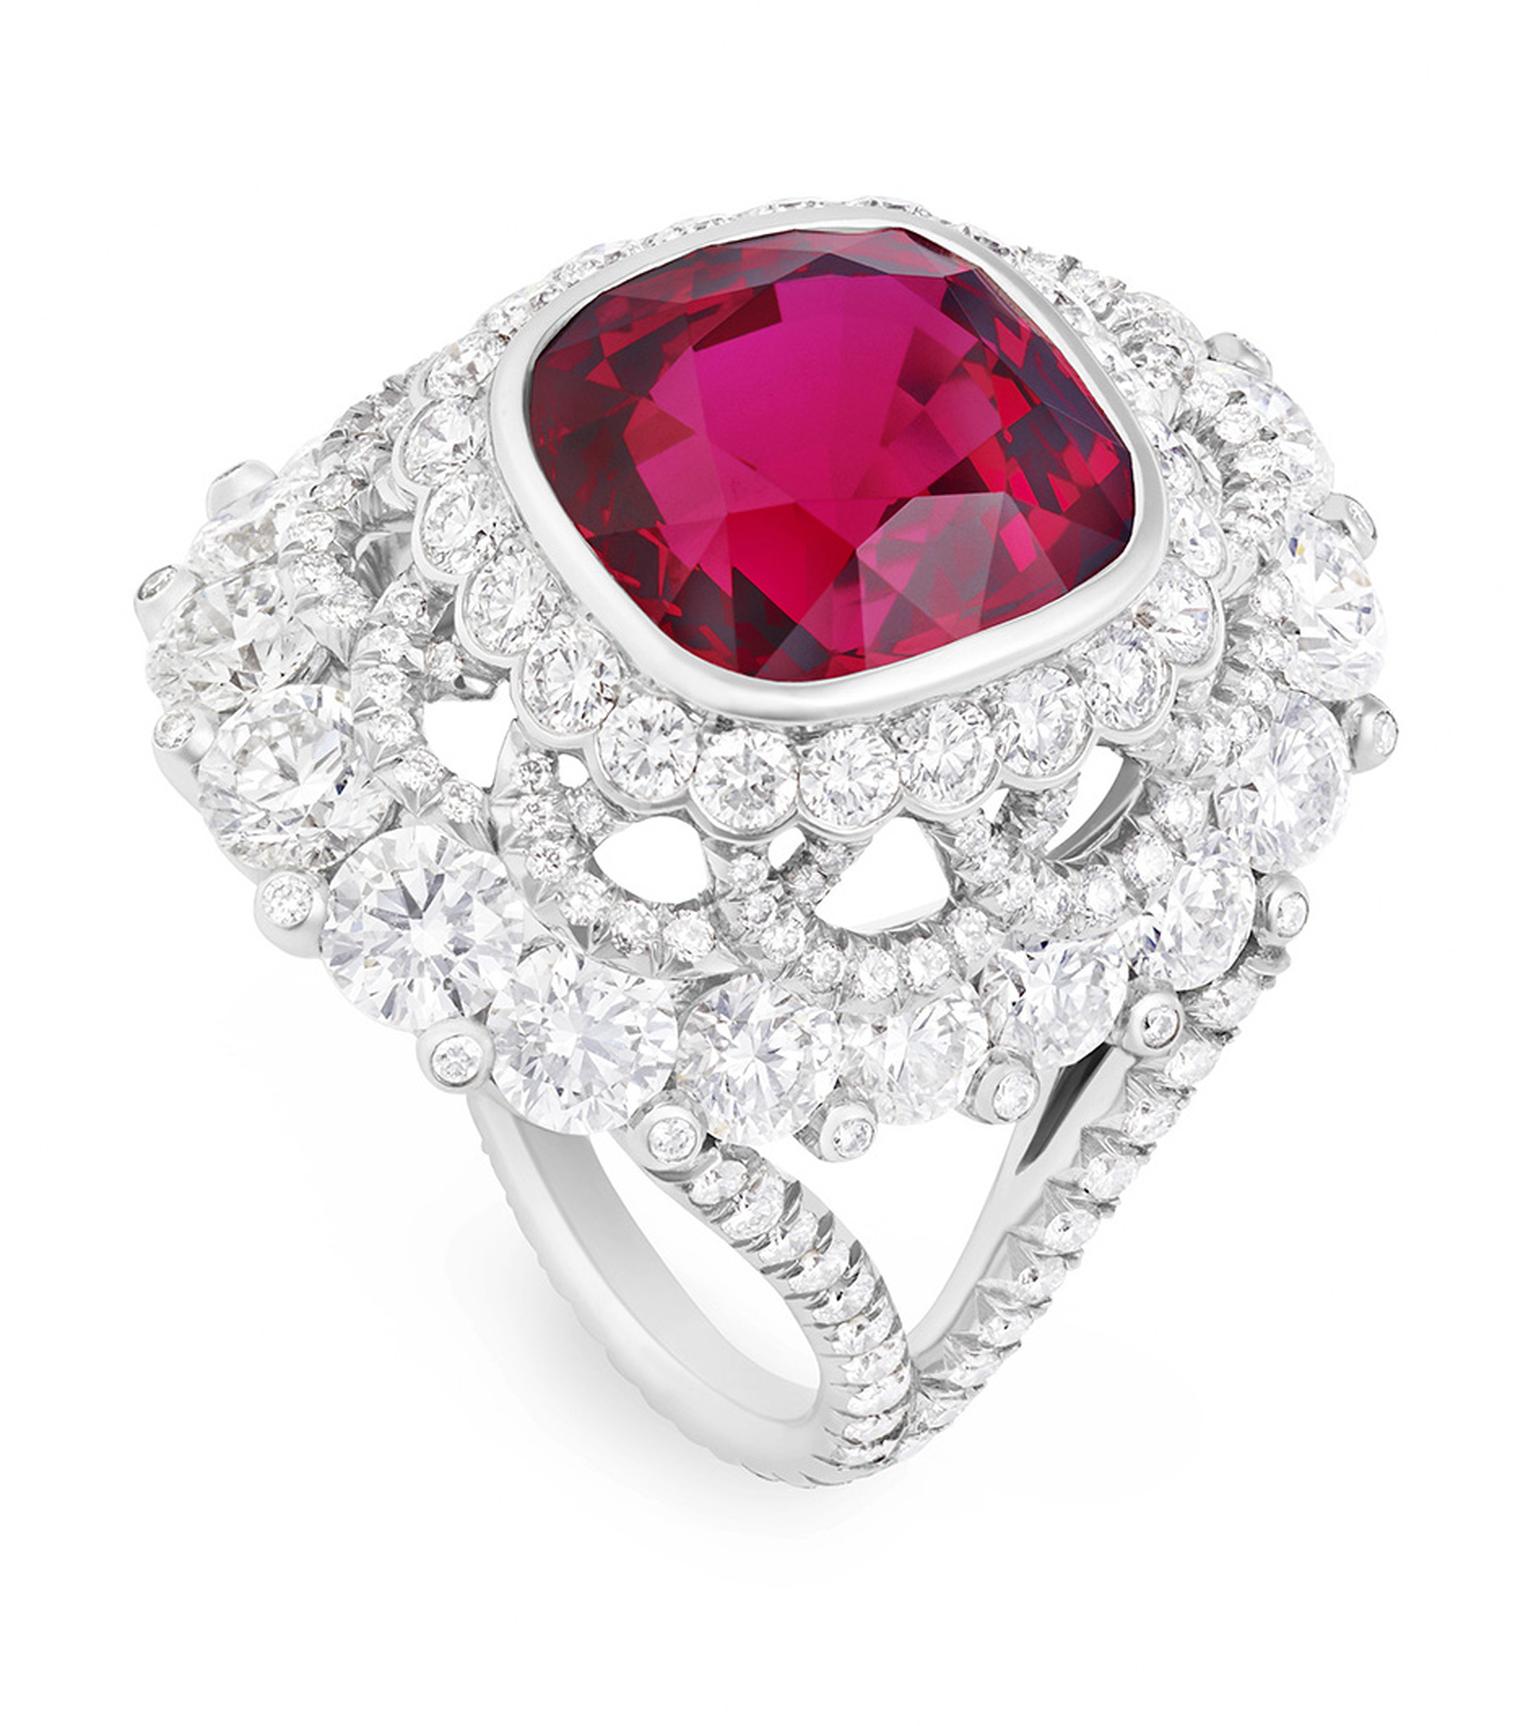 Faberge-Spinel-Ring.jpg